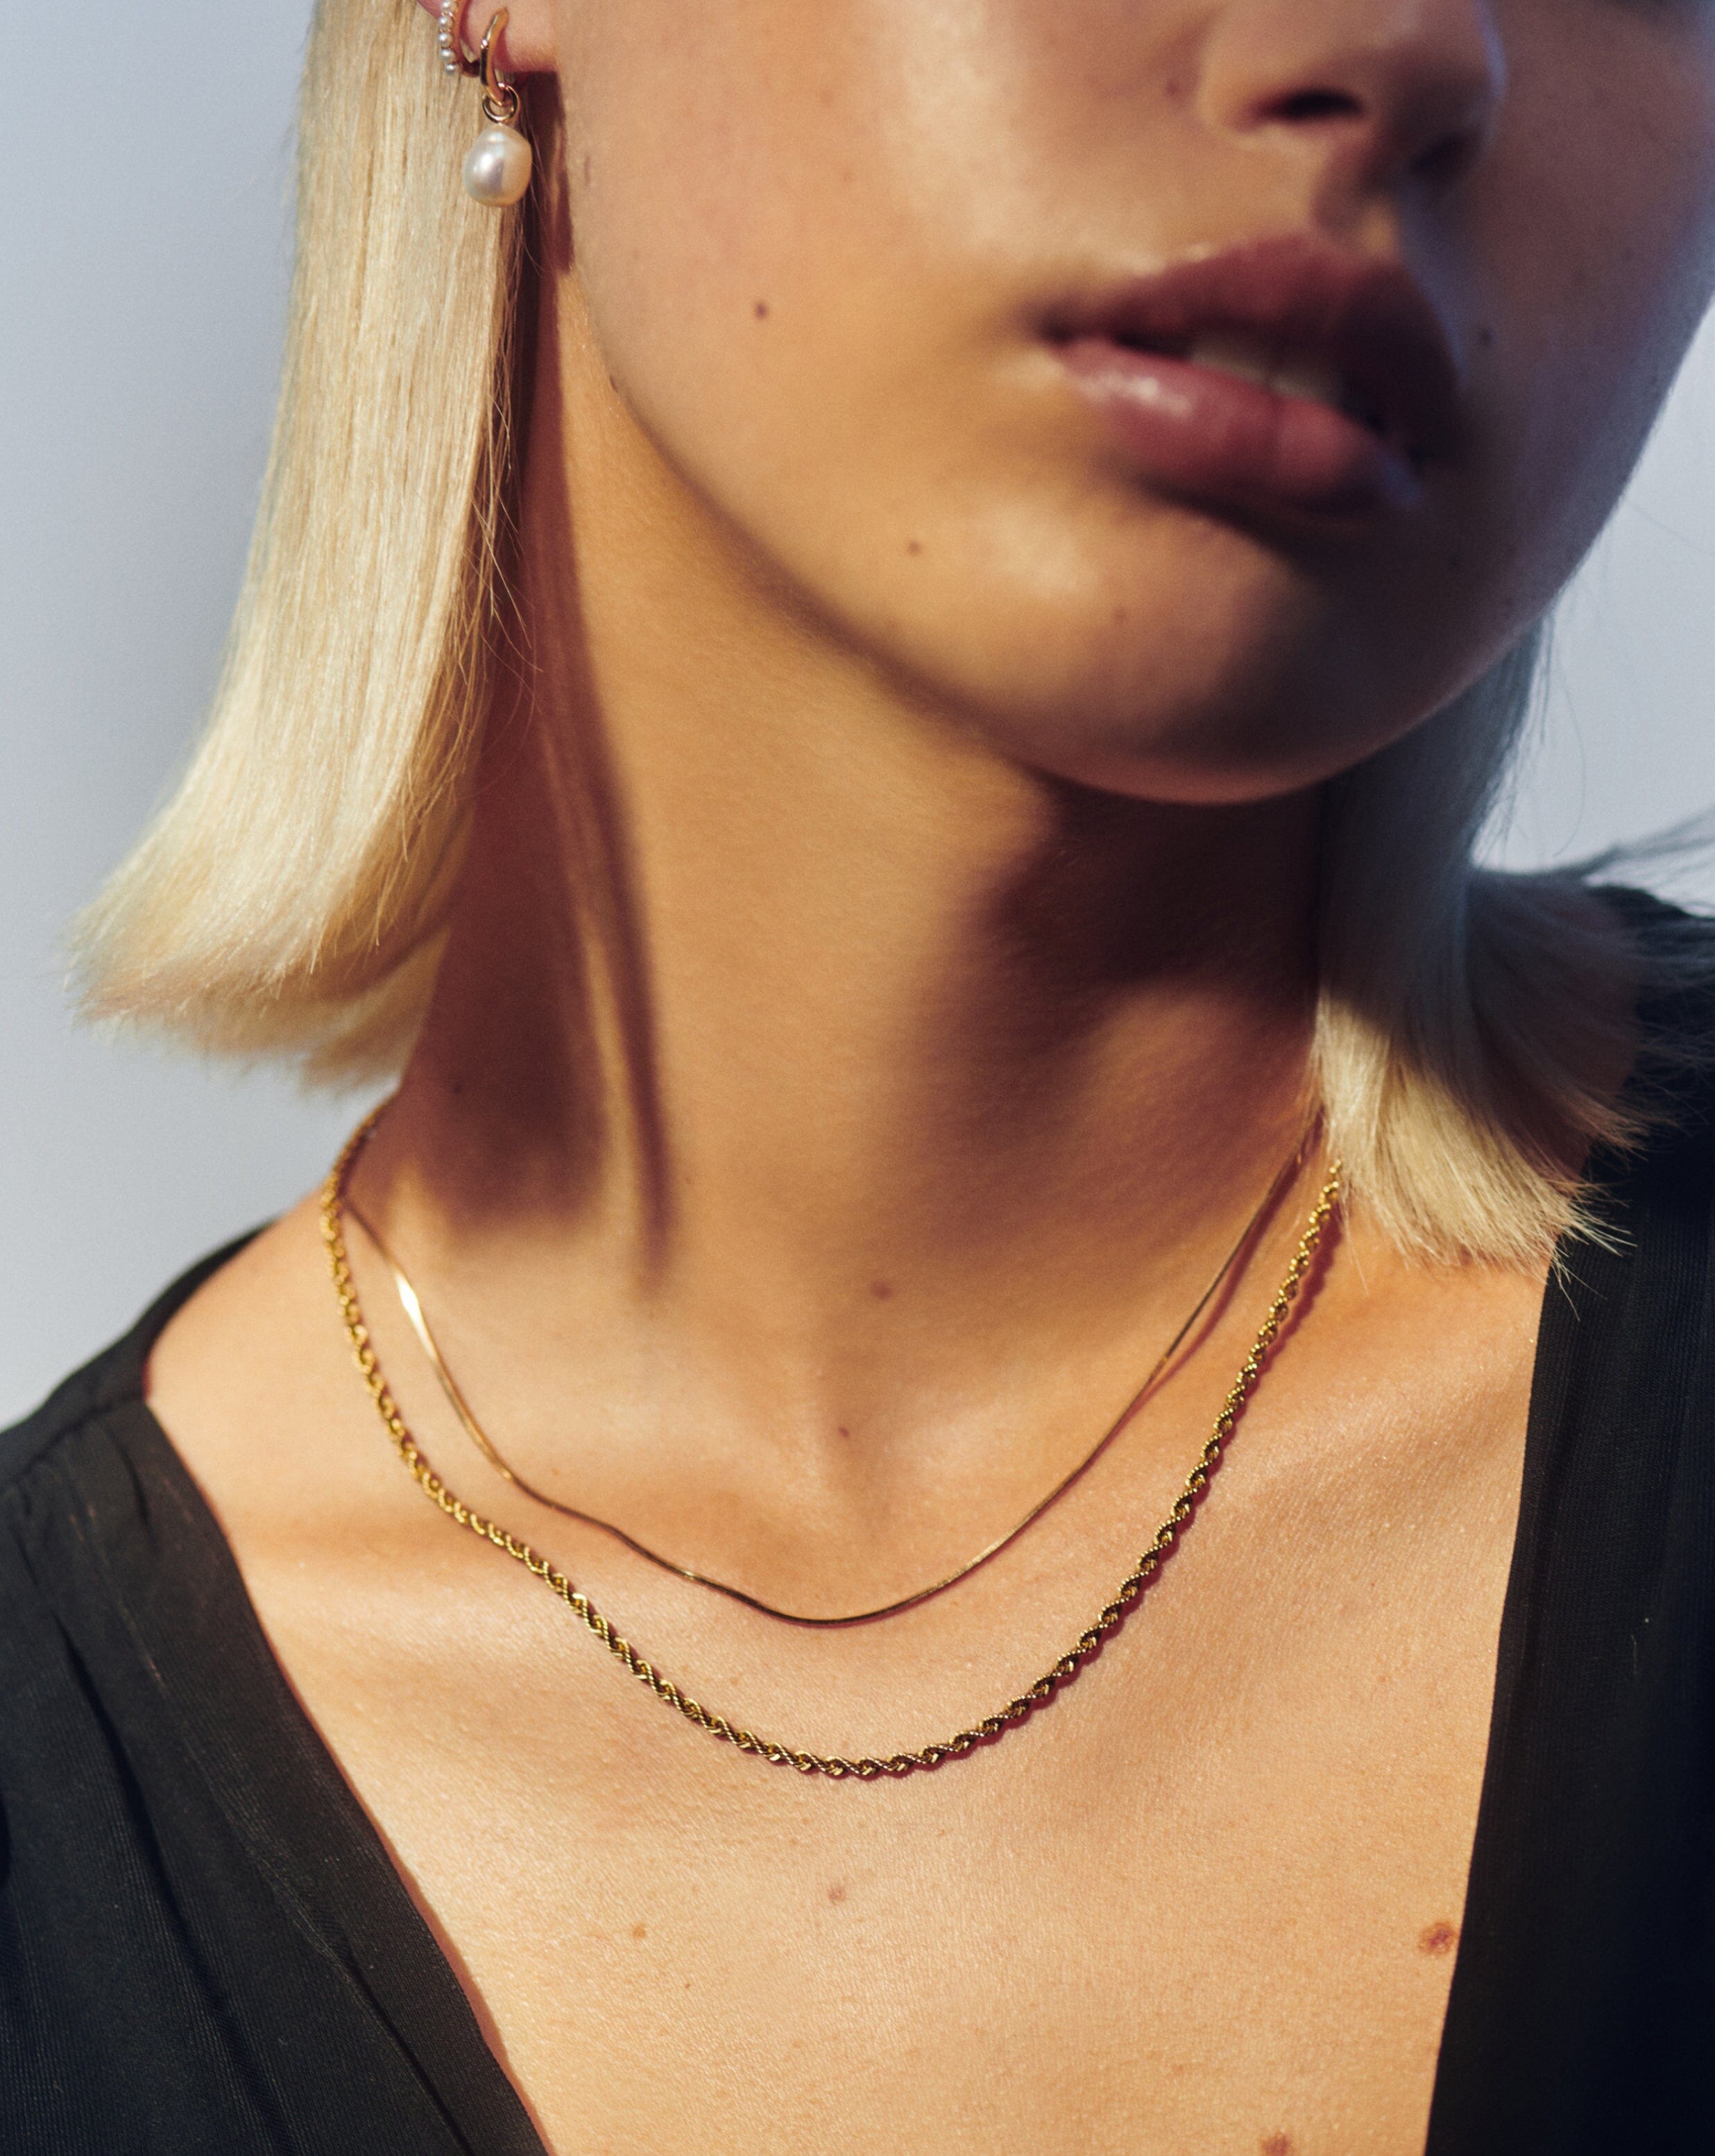 Silver Braided Herringbone Chain Necklace / 925 Sterling Silver / Twisted  Flat Snake Chain / 16 18 20 Inches / Women's Gift for Her - Etsy